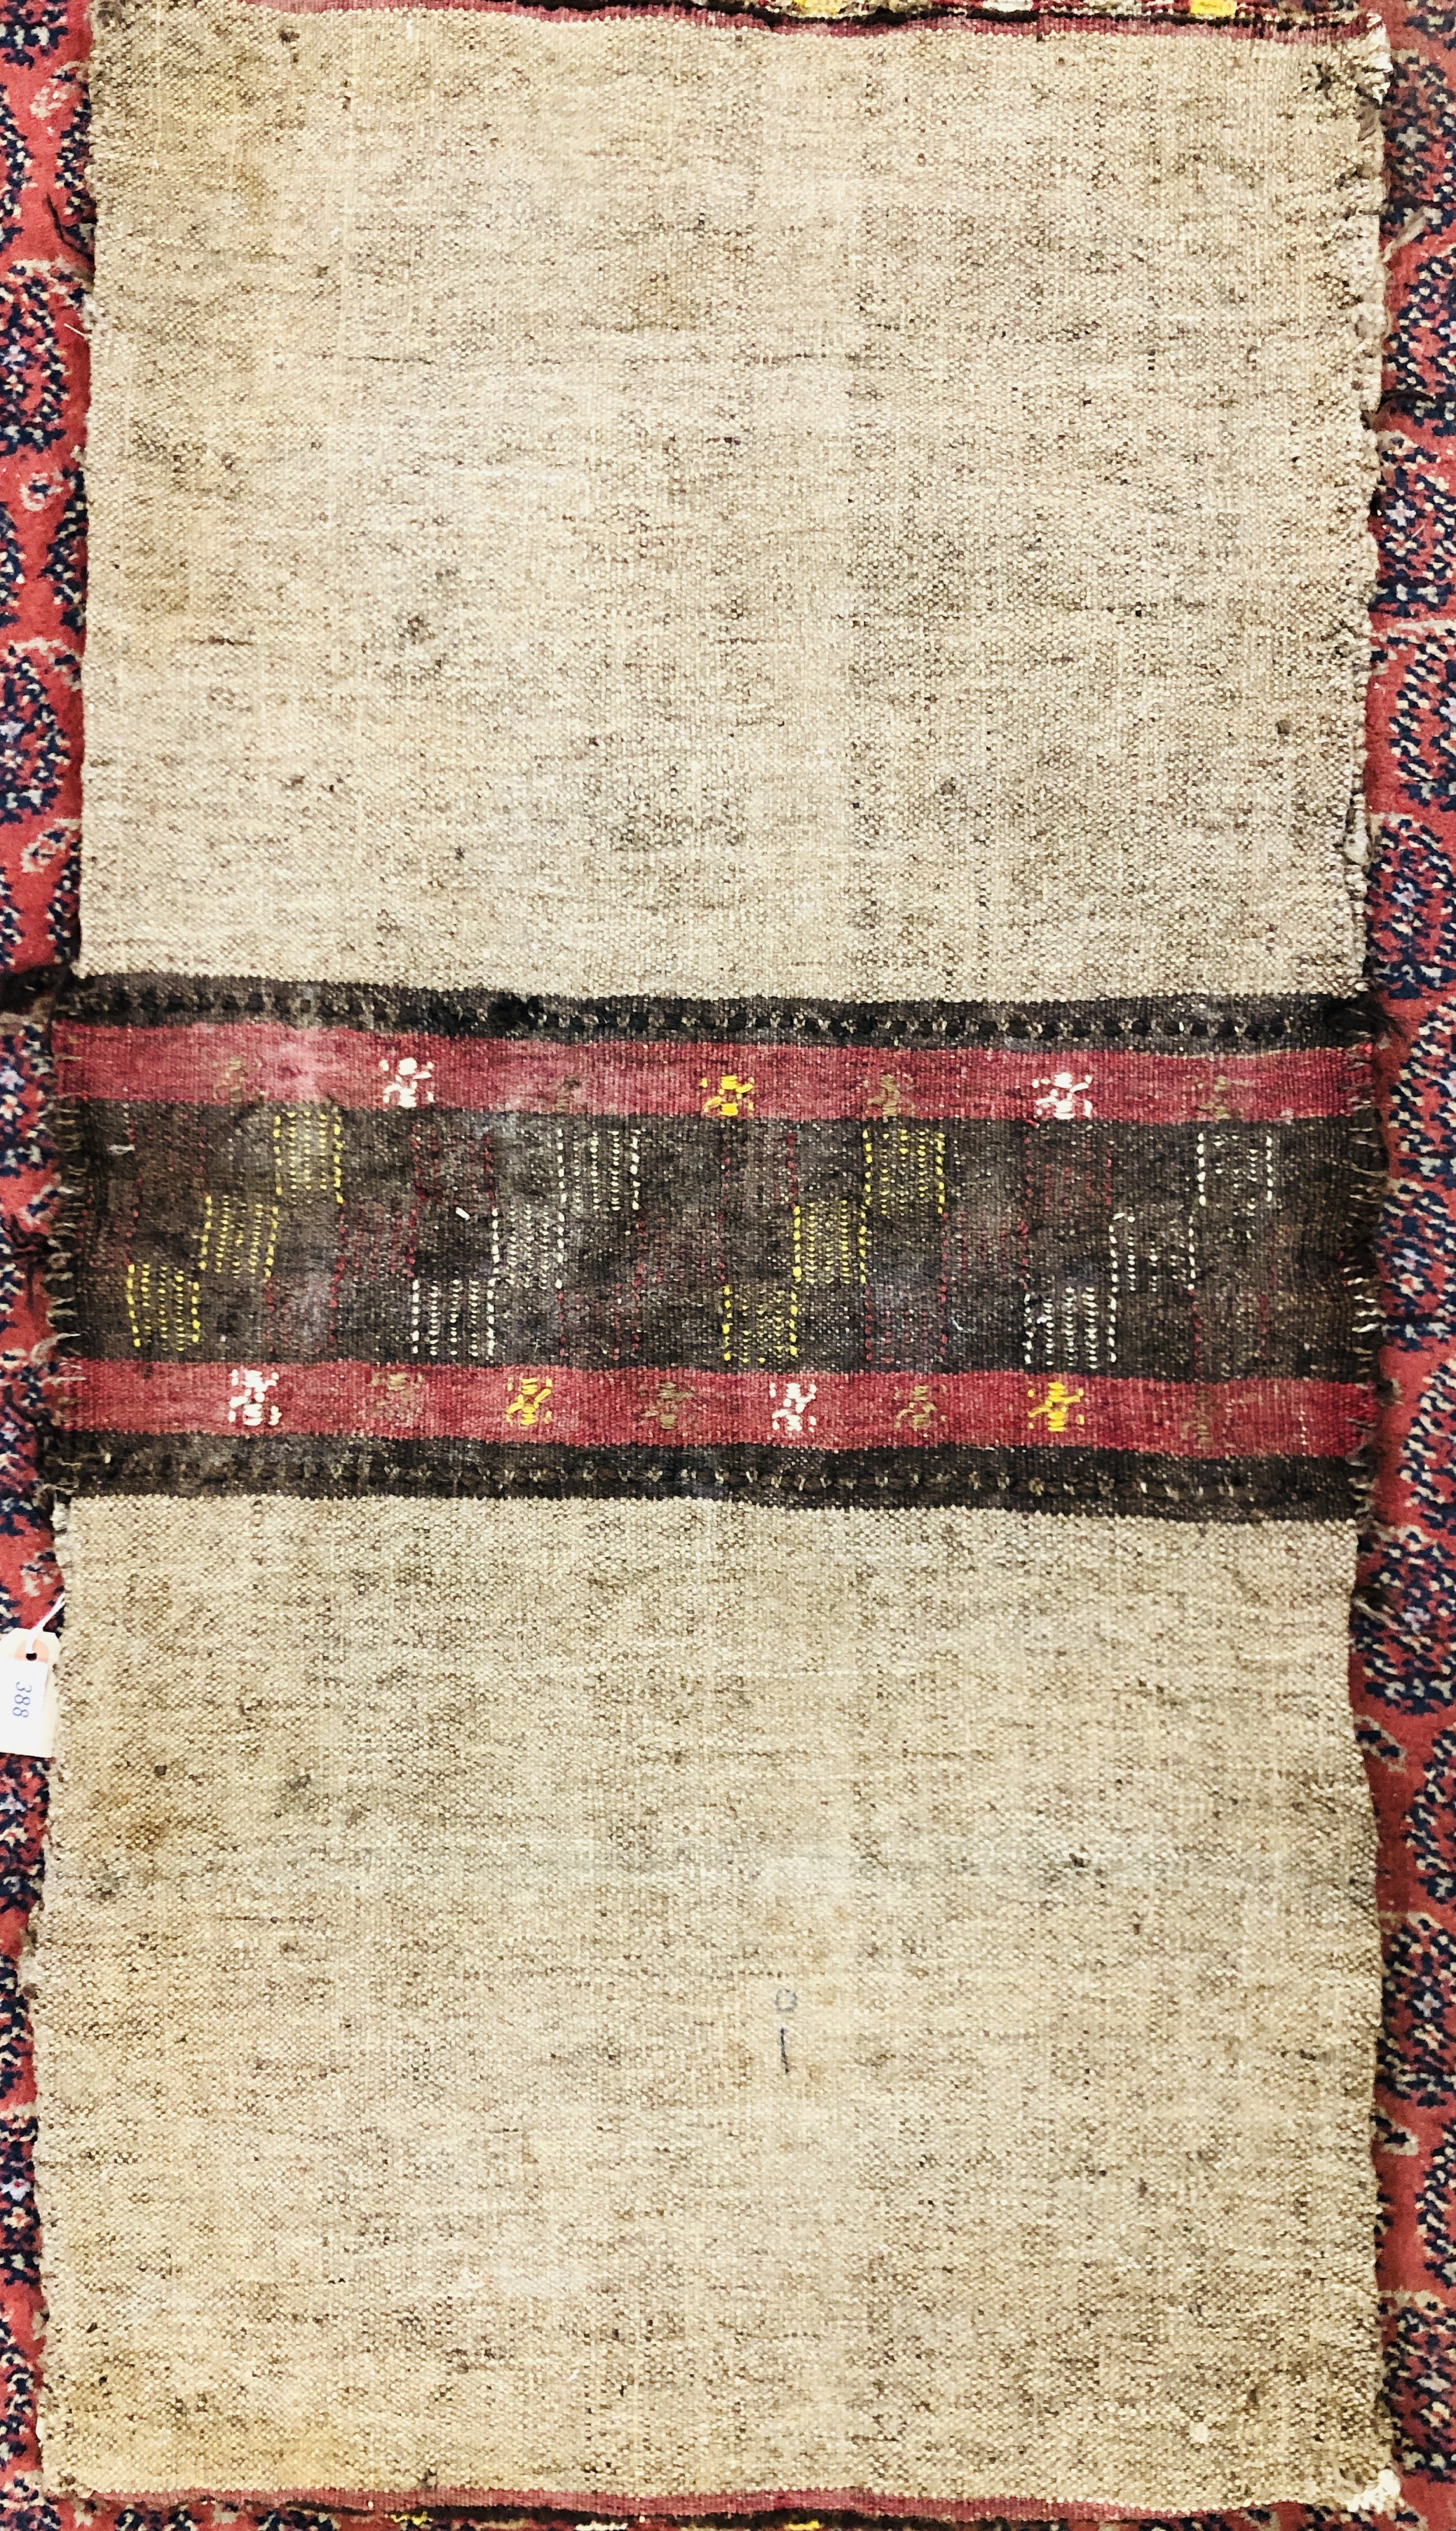 A DOUBLE SADDLE BAG WOVEN WITH COLUMNS INCLUDING STYLIZED "S" DESIGNS, PROBABLY BELOUCH WIDTH 111CM. - Image 5 of 8